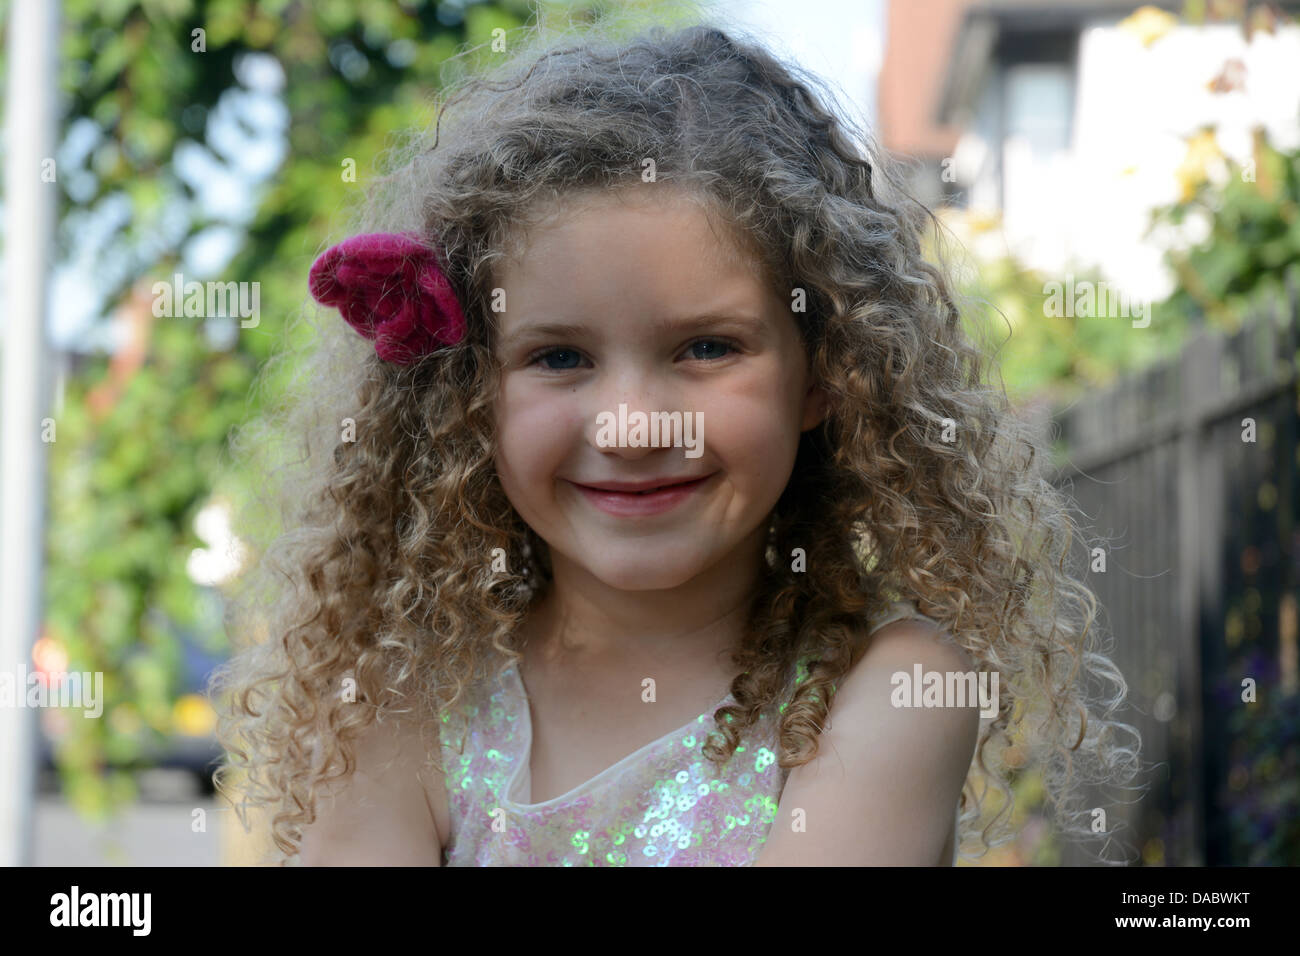 A pretty five year old girl with curly hair smiles into the camera Stock Photo